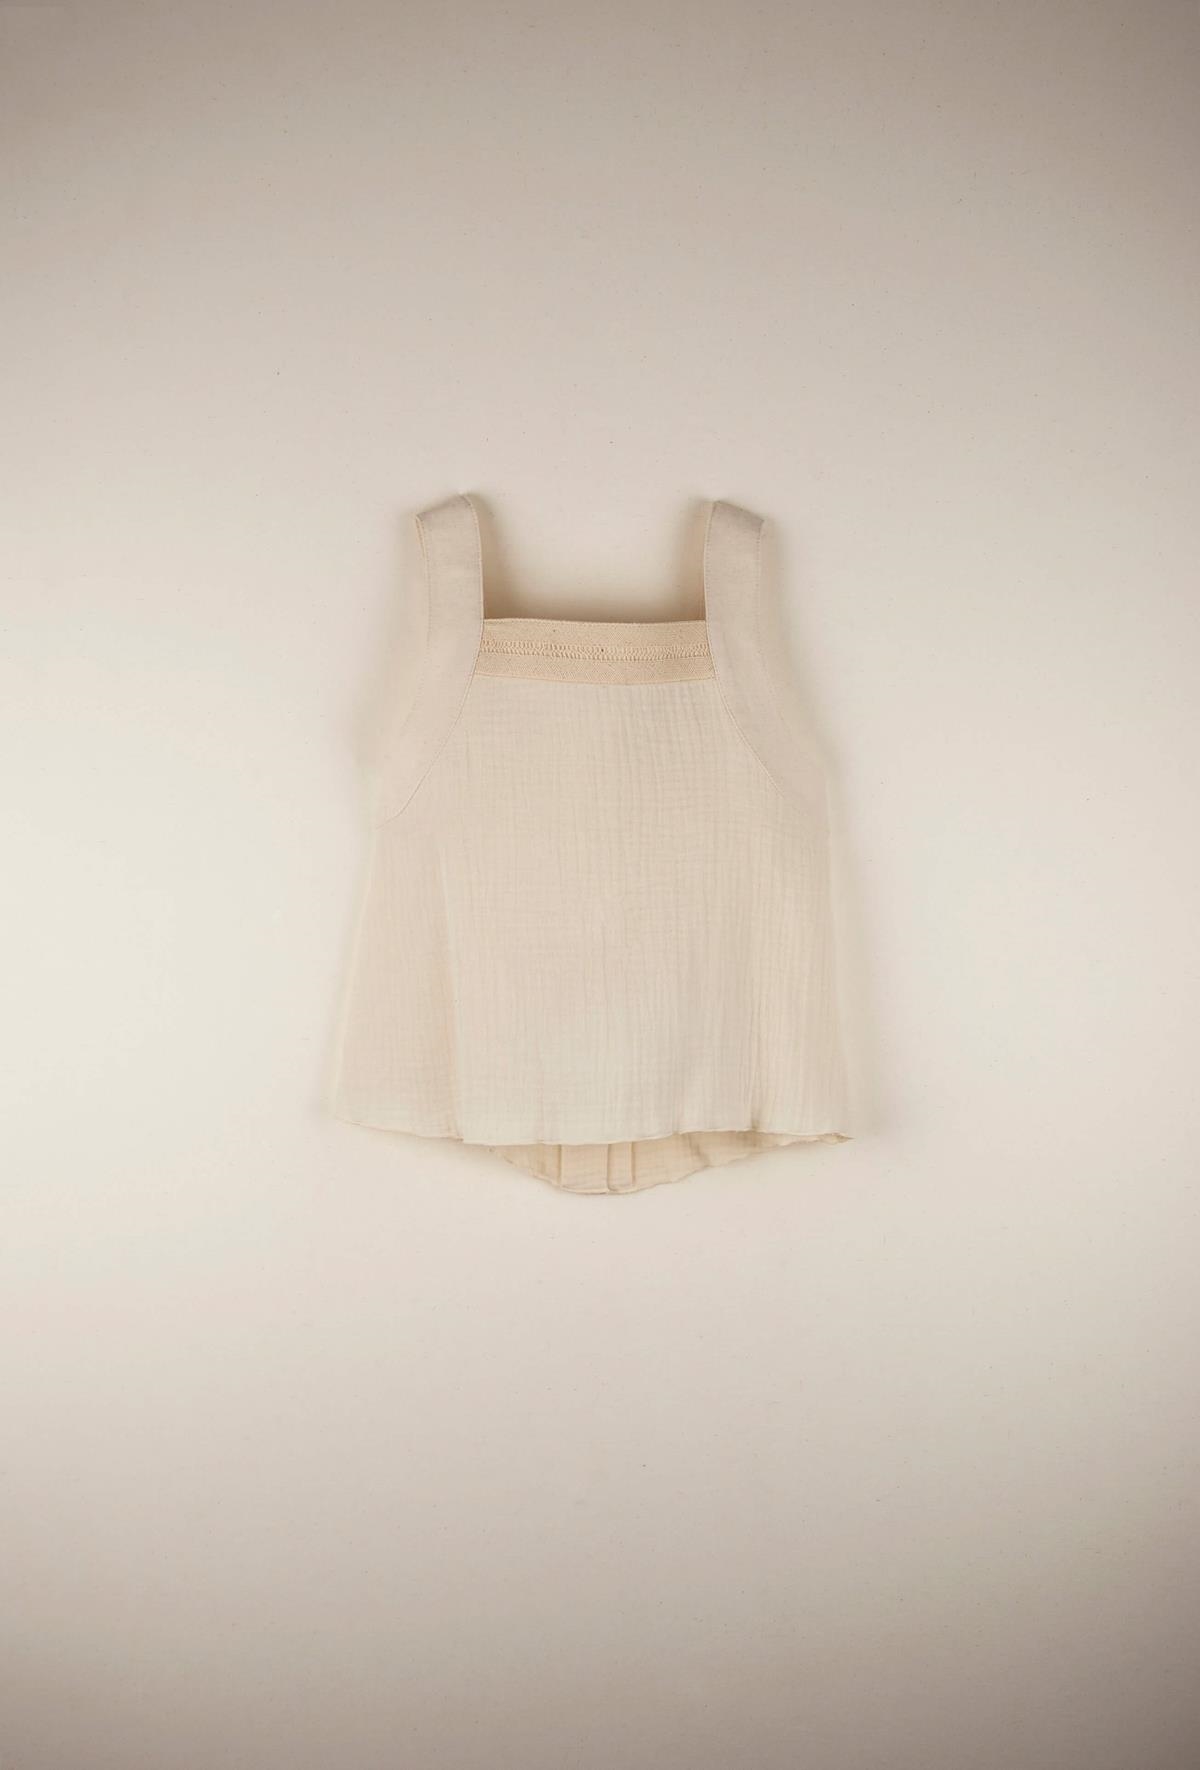 Mod.19.1 Off white organic blouse with straps | SS22 Mod.19.1 Off white organic blouse with straps | 1